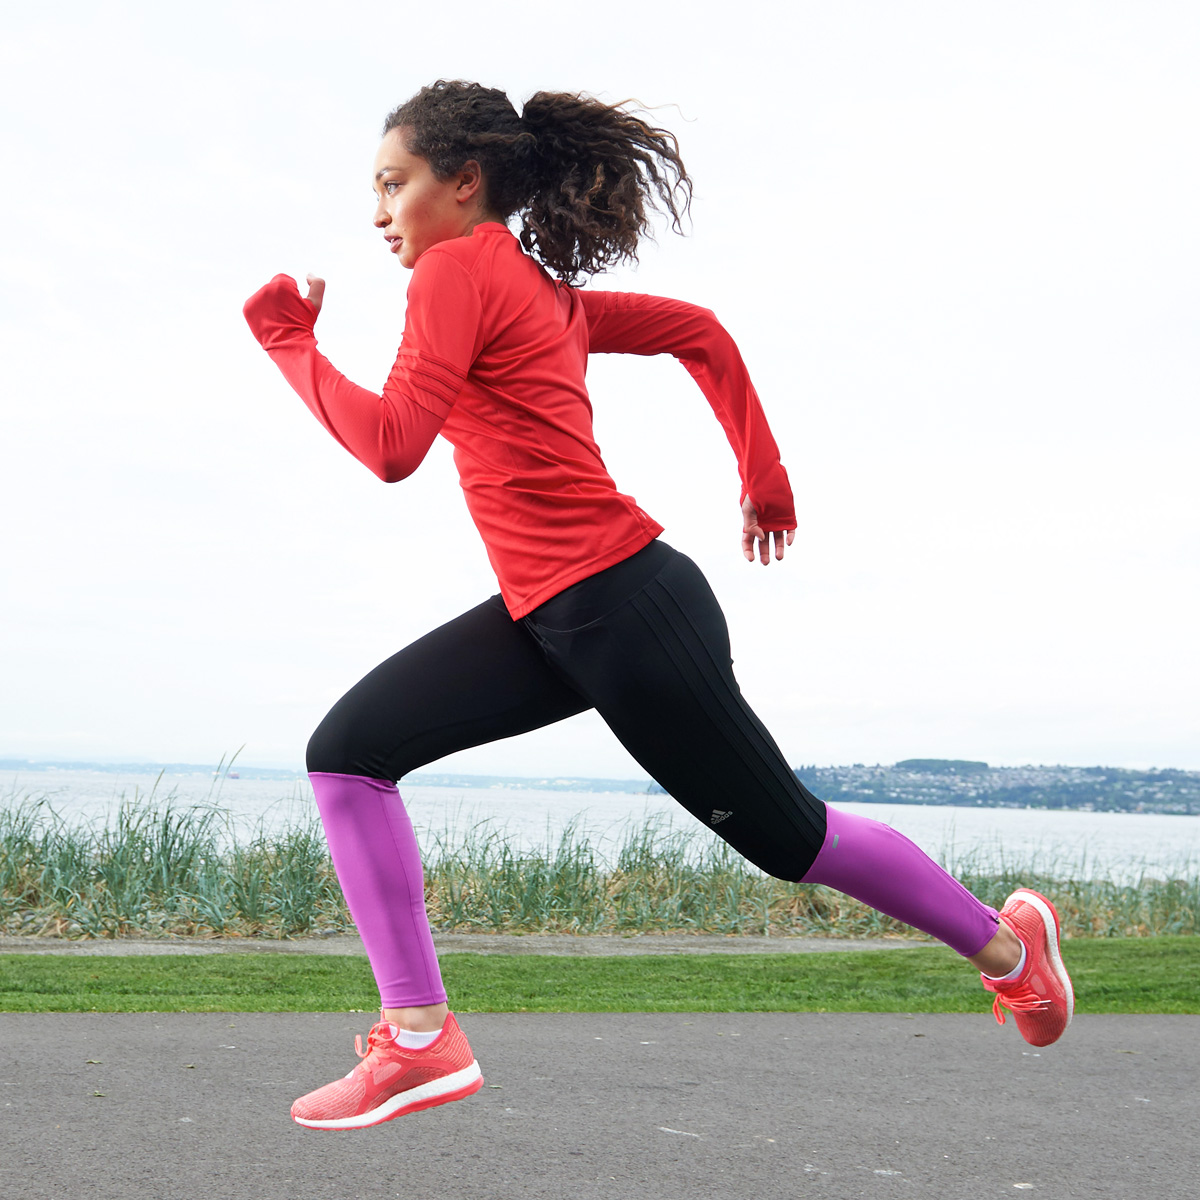 Five Things You Can Do To Make Your Run More Safe - Women Fitness